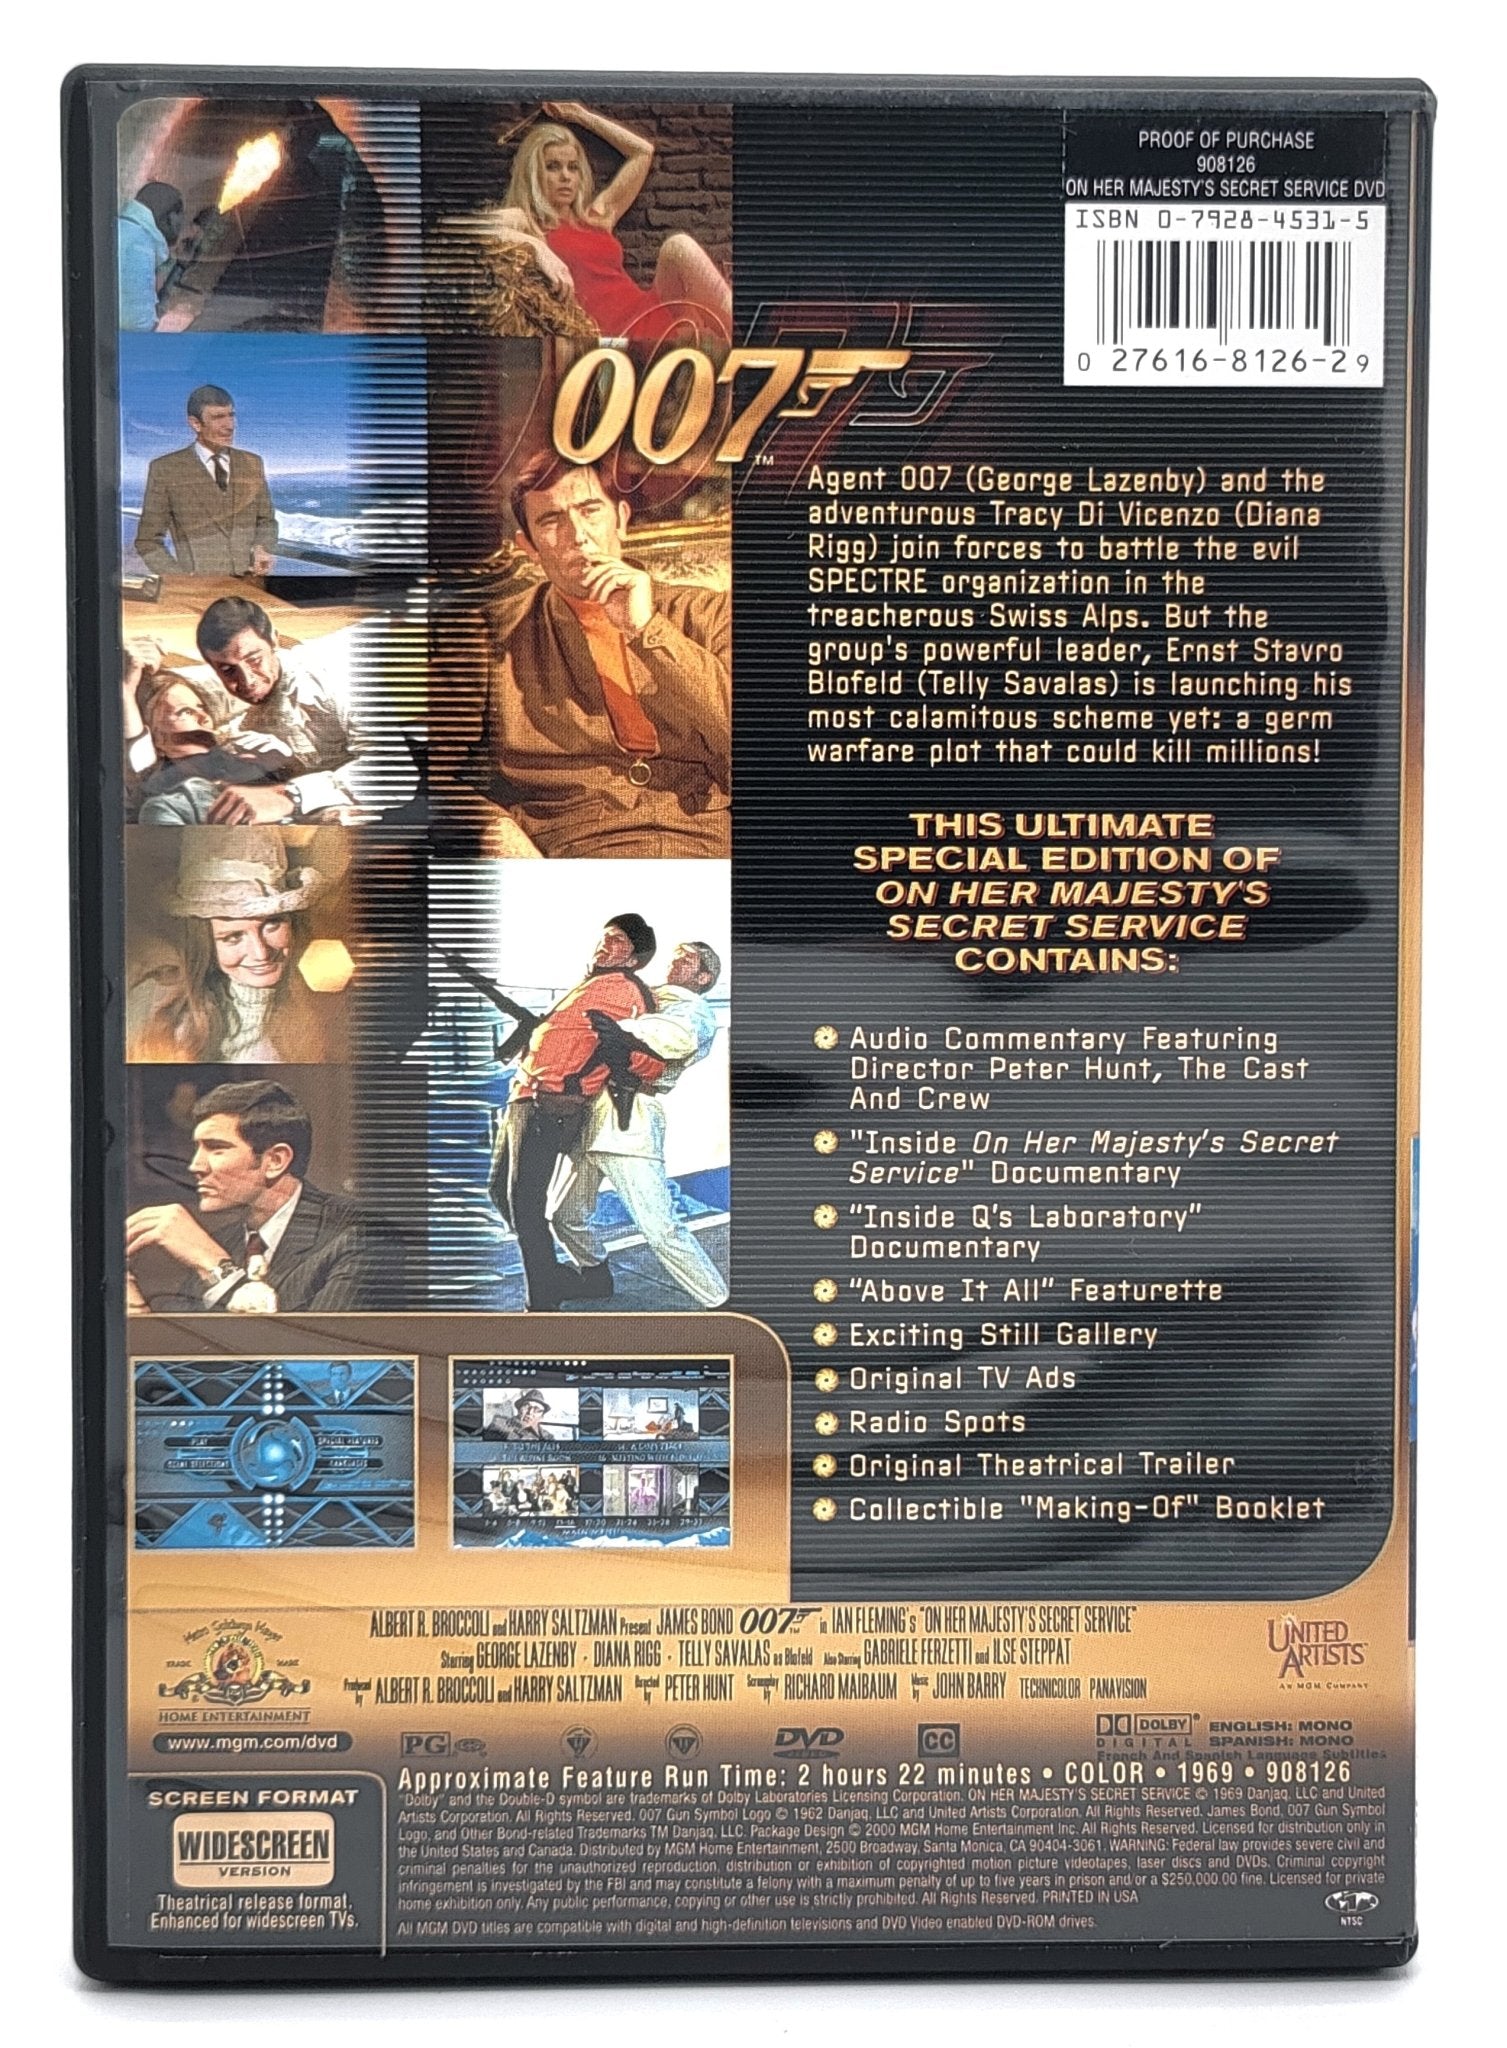 ‎ MGM Home Entertainment - James Bond 007 - On Her Majesty's Secret Service 2000 | DVD | Special 007 Edition - DVD - Steady Bunny Shop